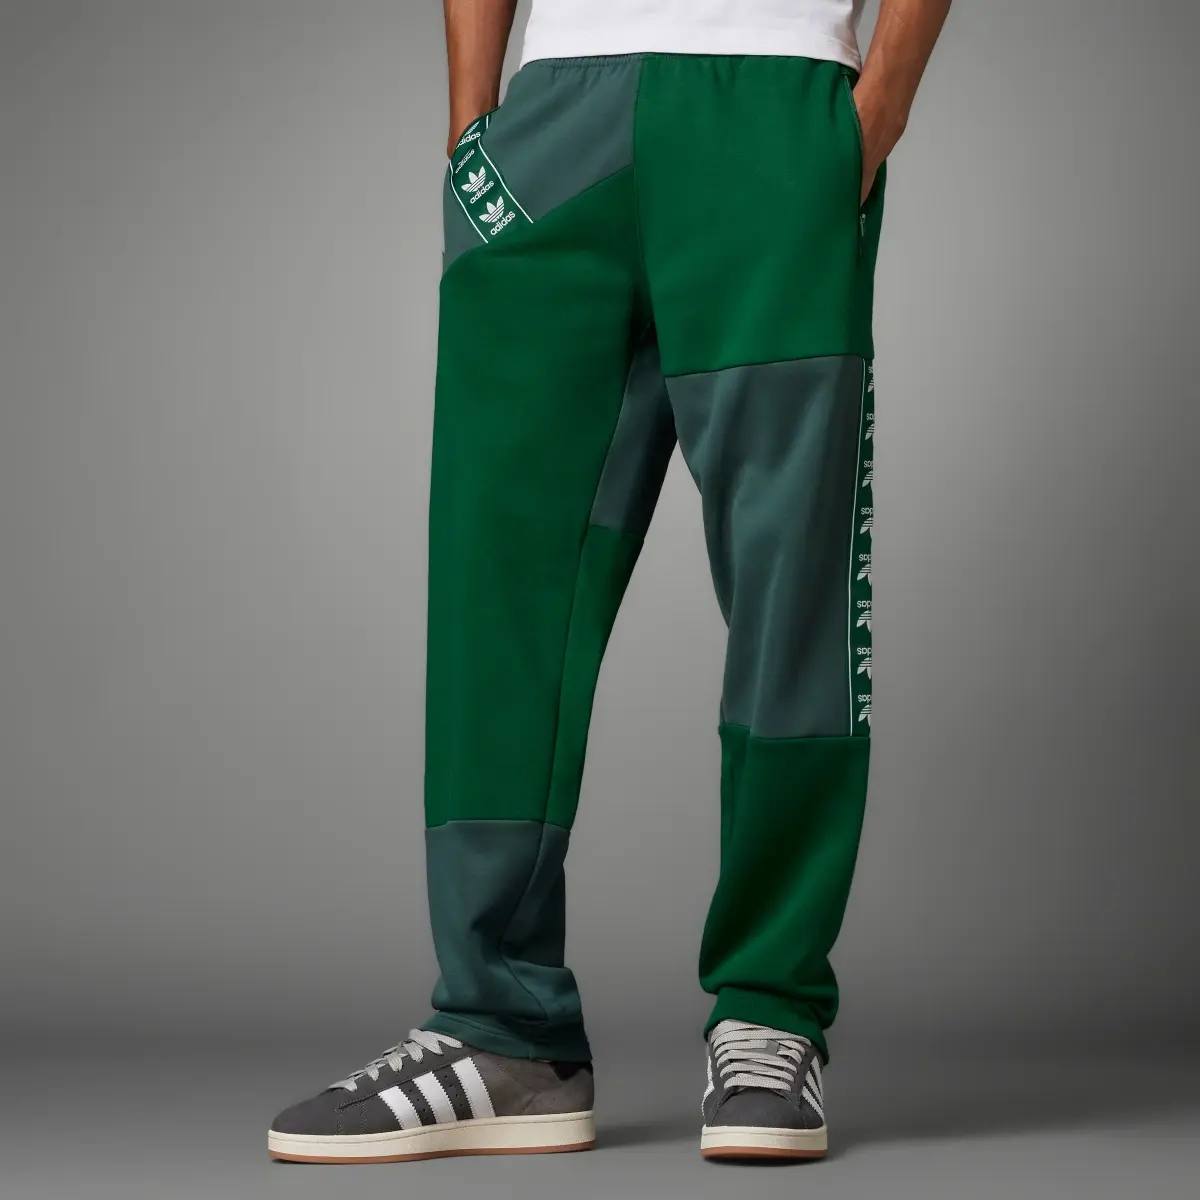 Adidas ADC Patchwork FB Joggers. 1